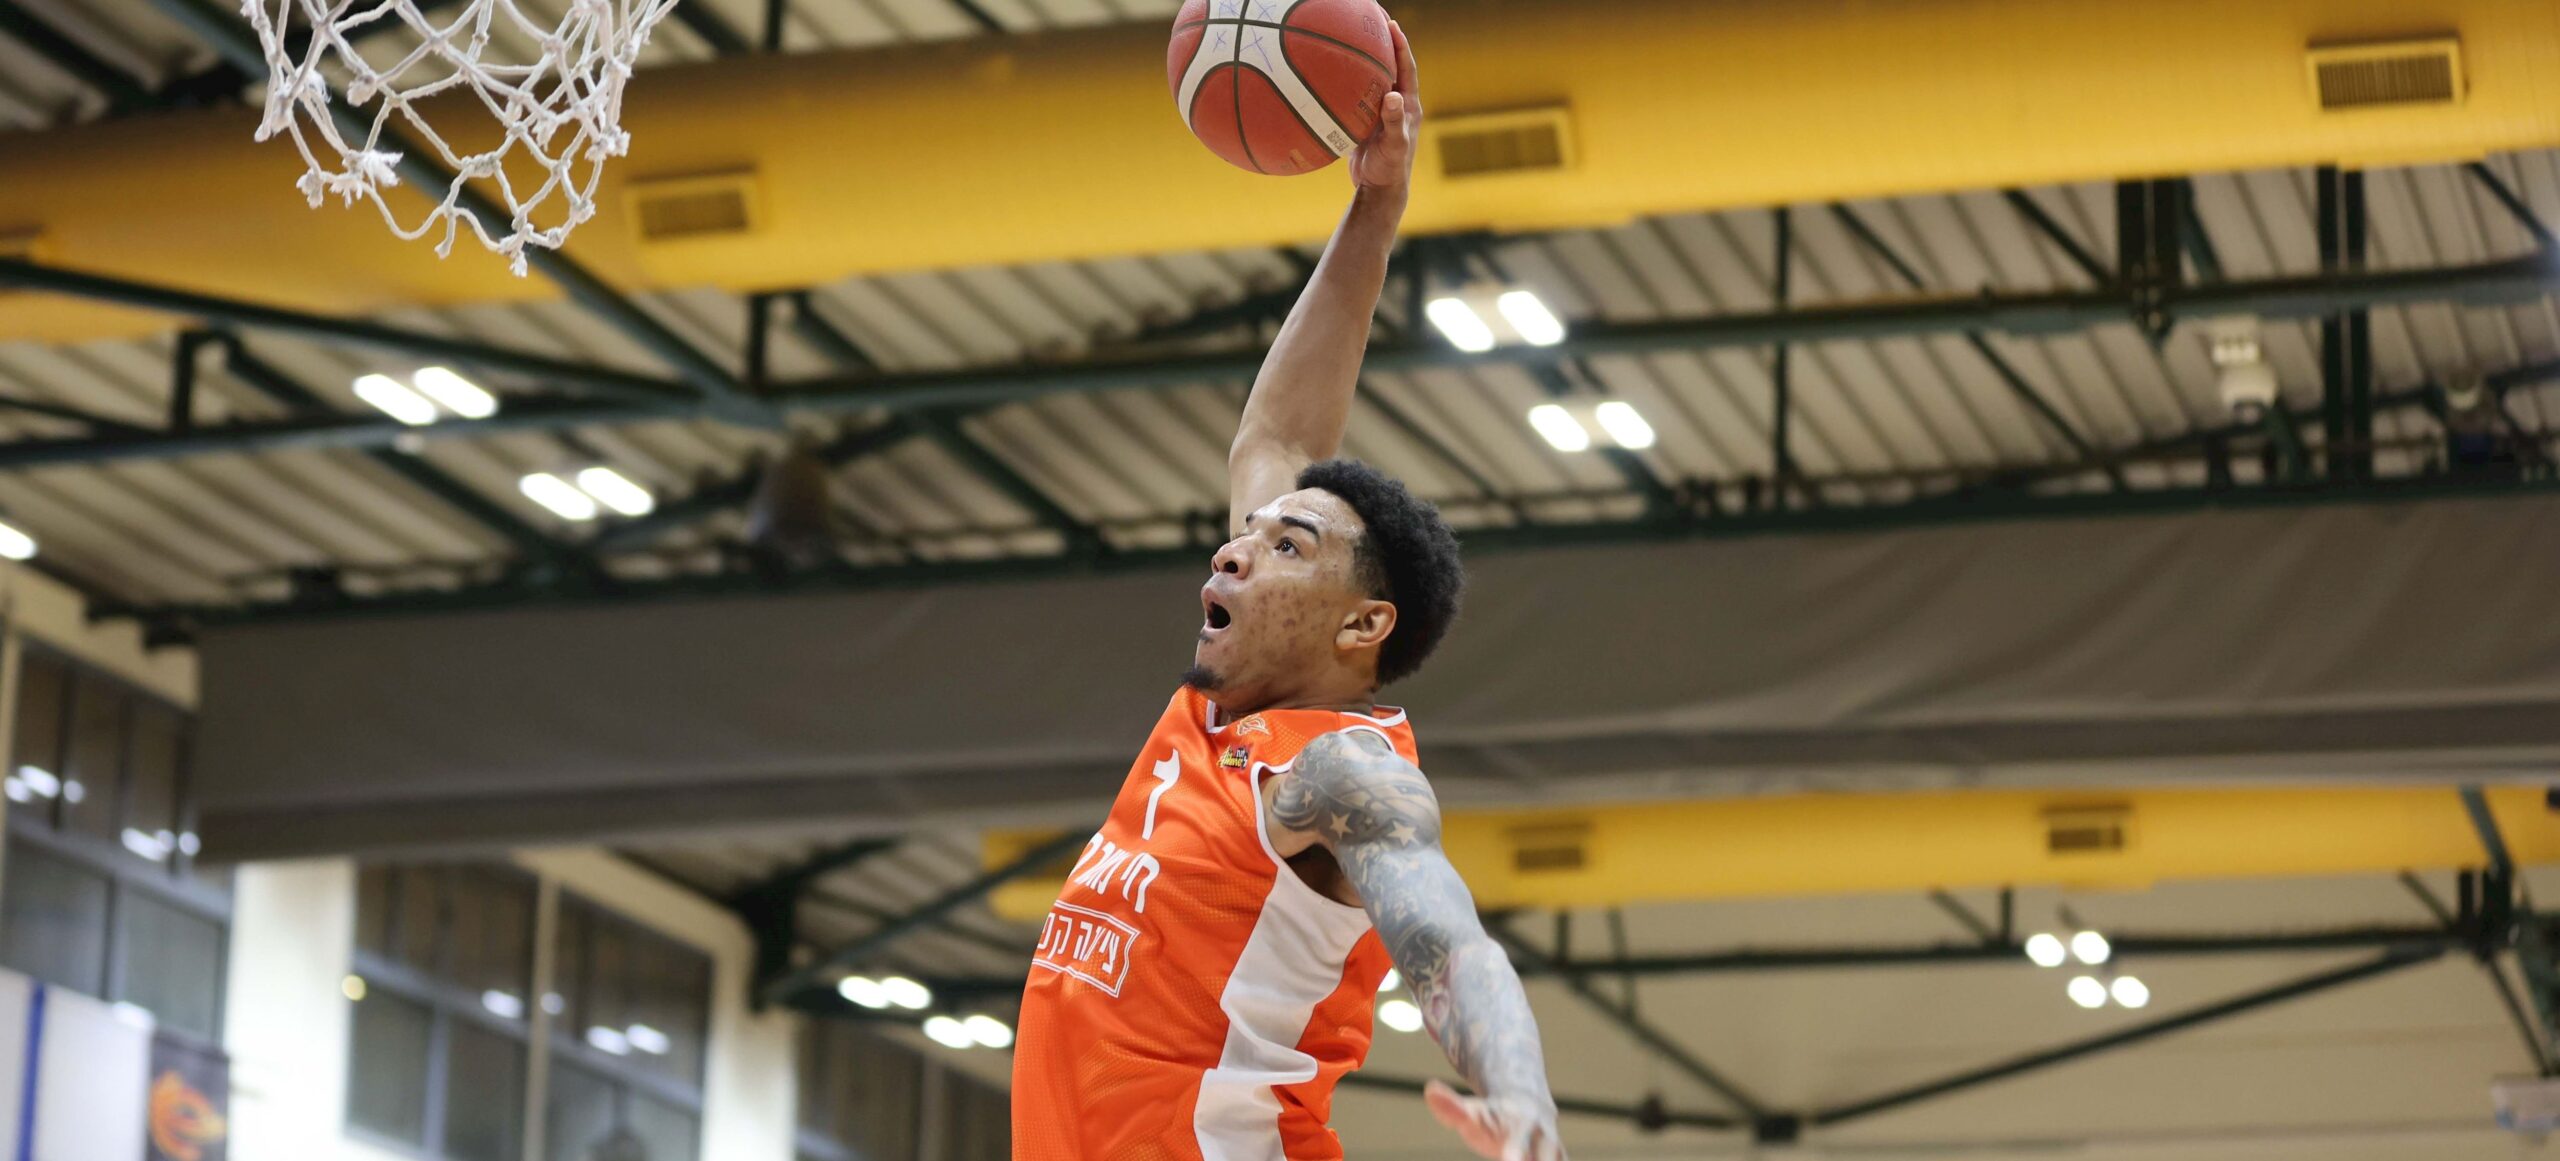 “Putting the league on notice” Tyler Bey and Elad Hasin’s Nes Ziona are making waves in Israeli League action